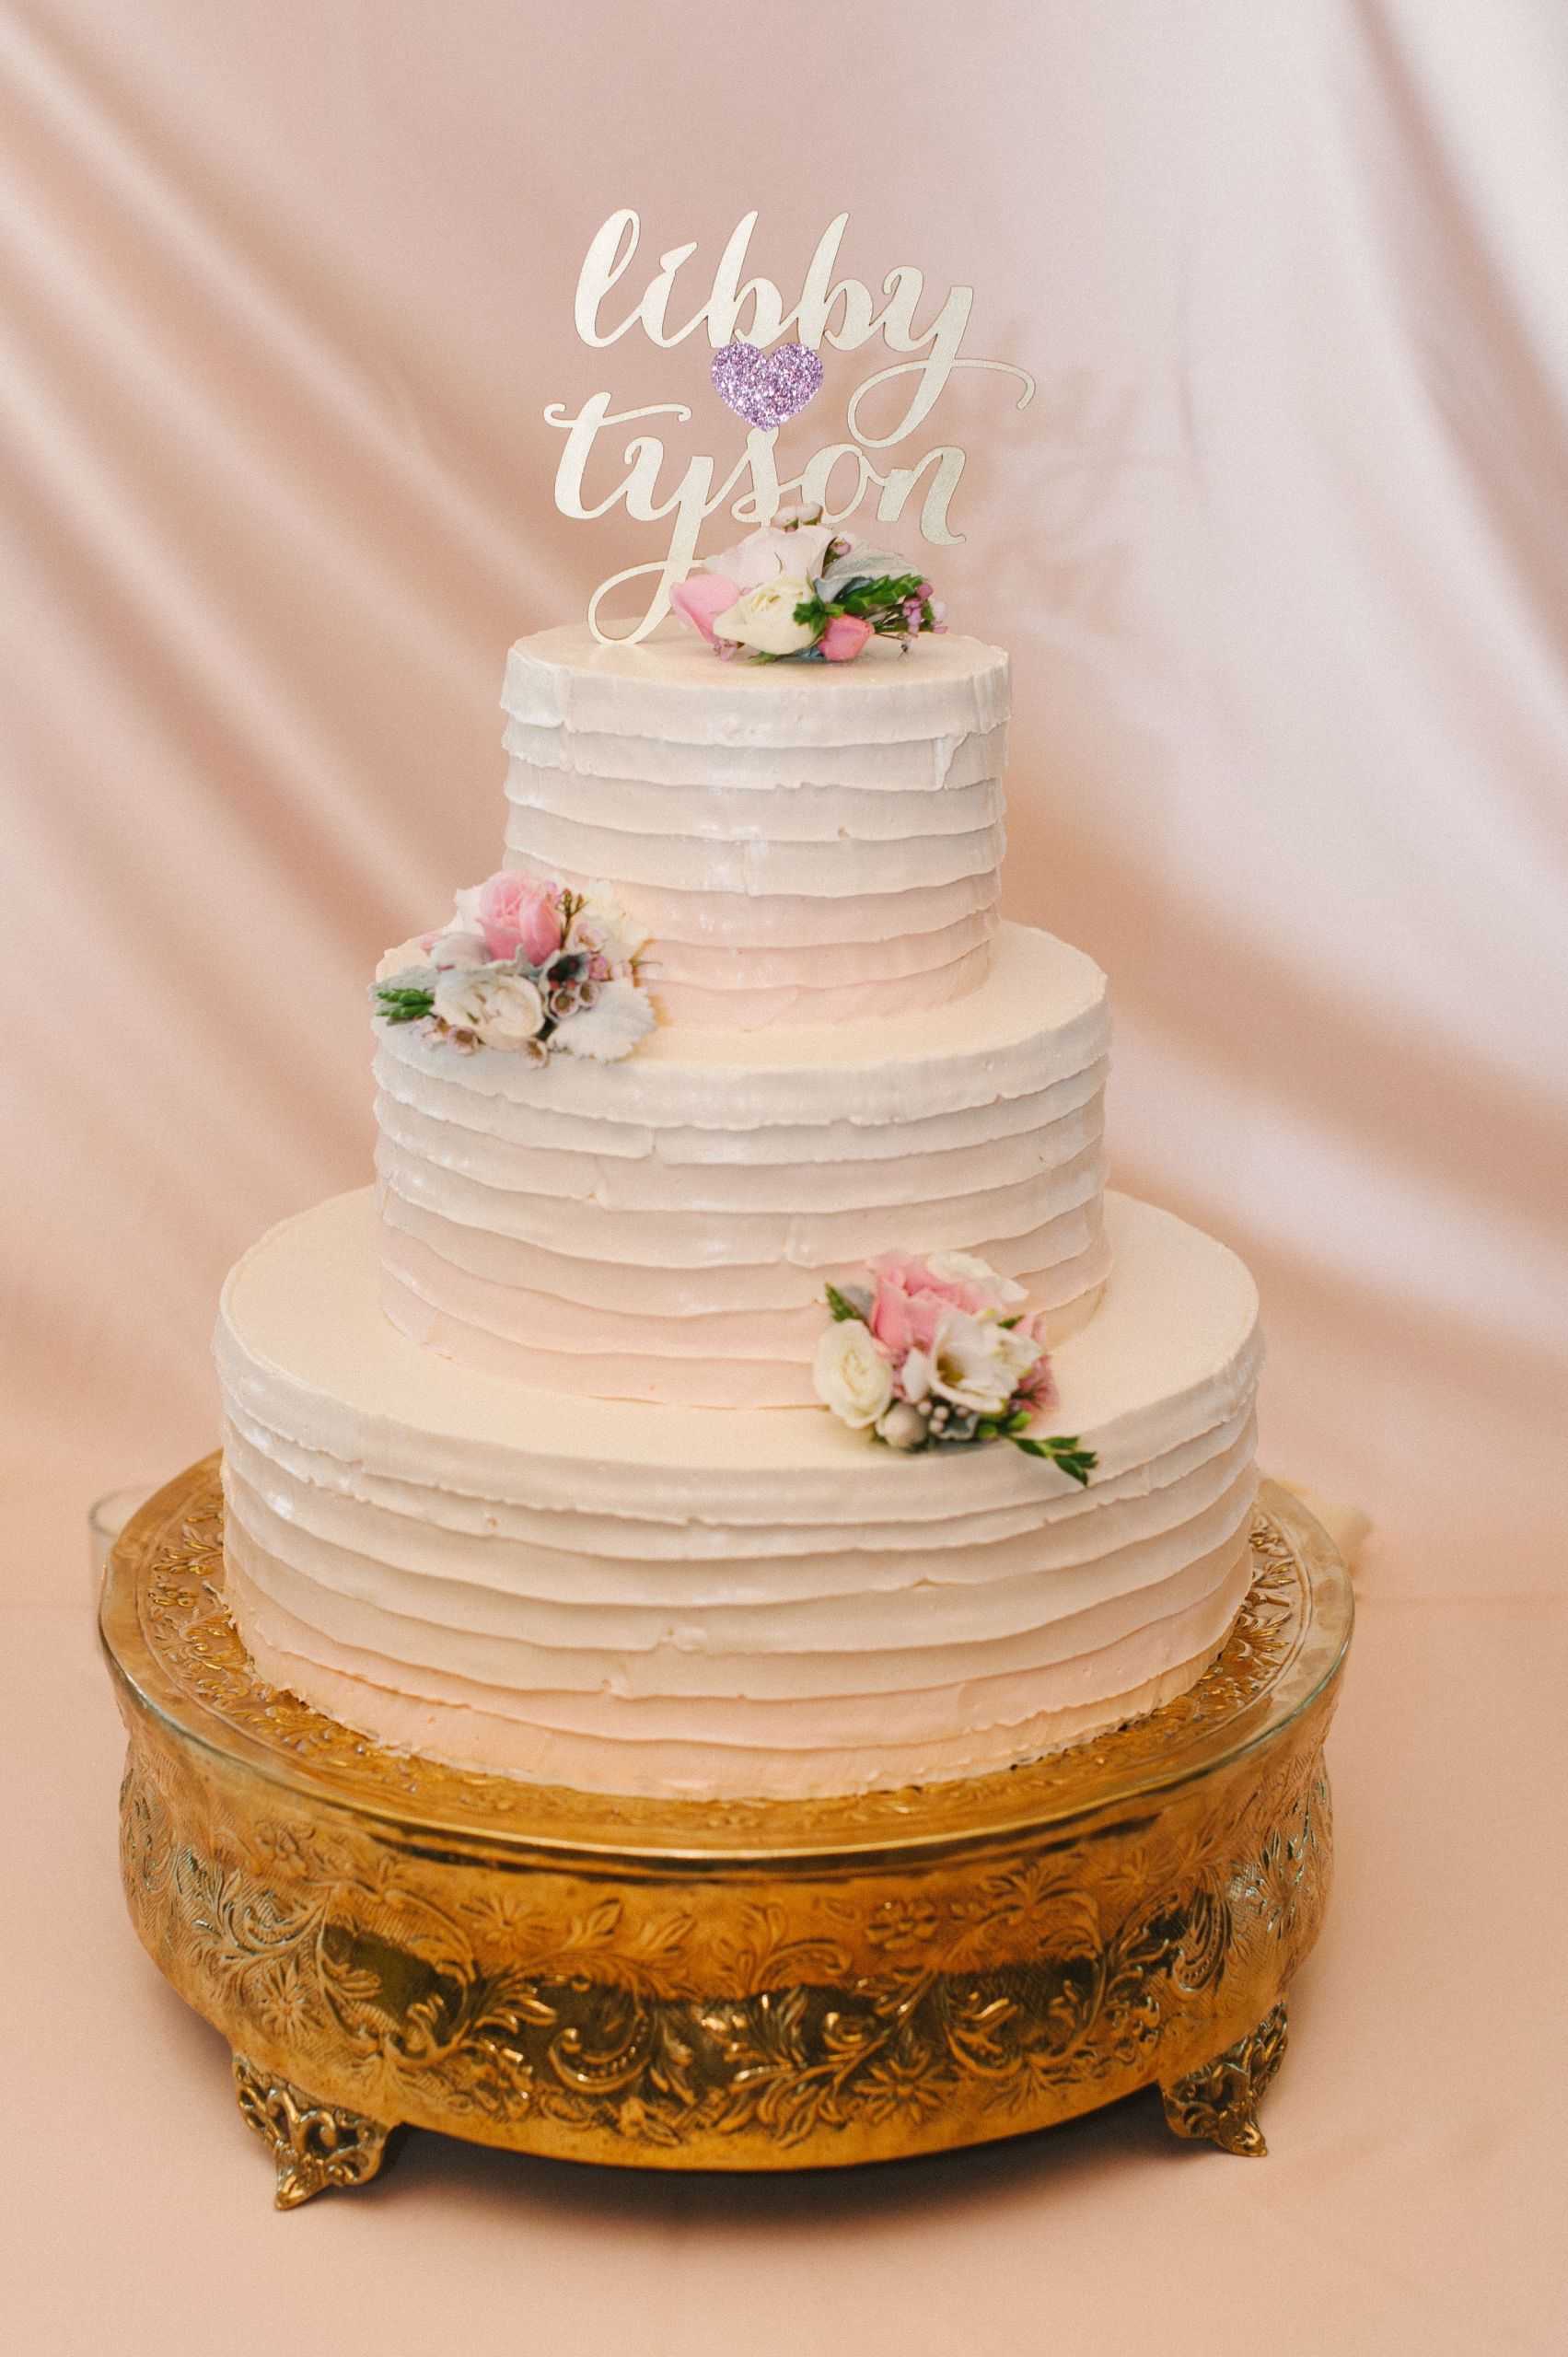 Wedding Cakes Madison Wi
 Wedding cakes by Madison Club Pastry Chef Judy James